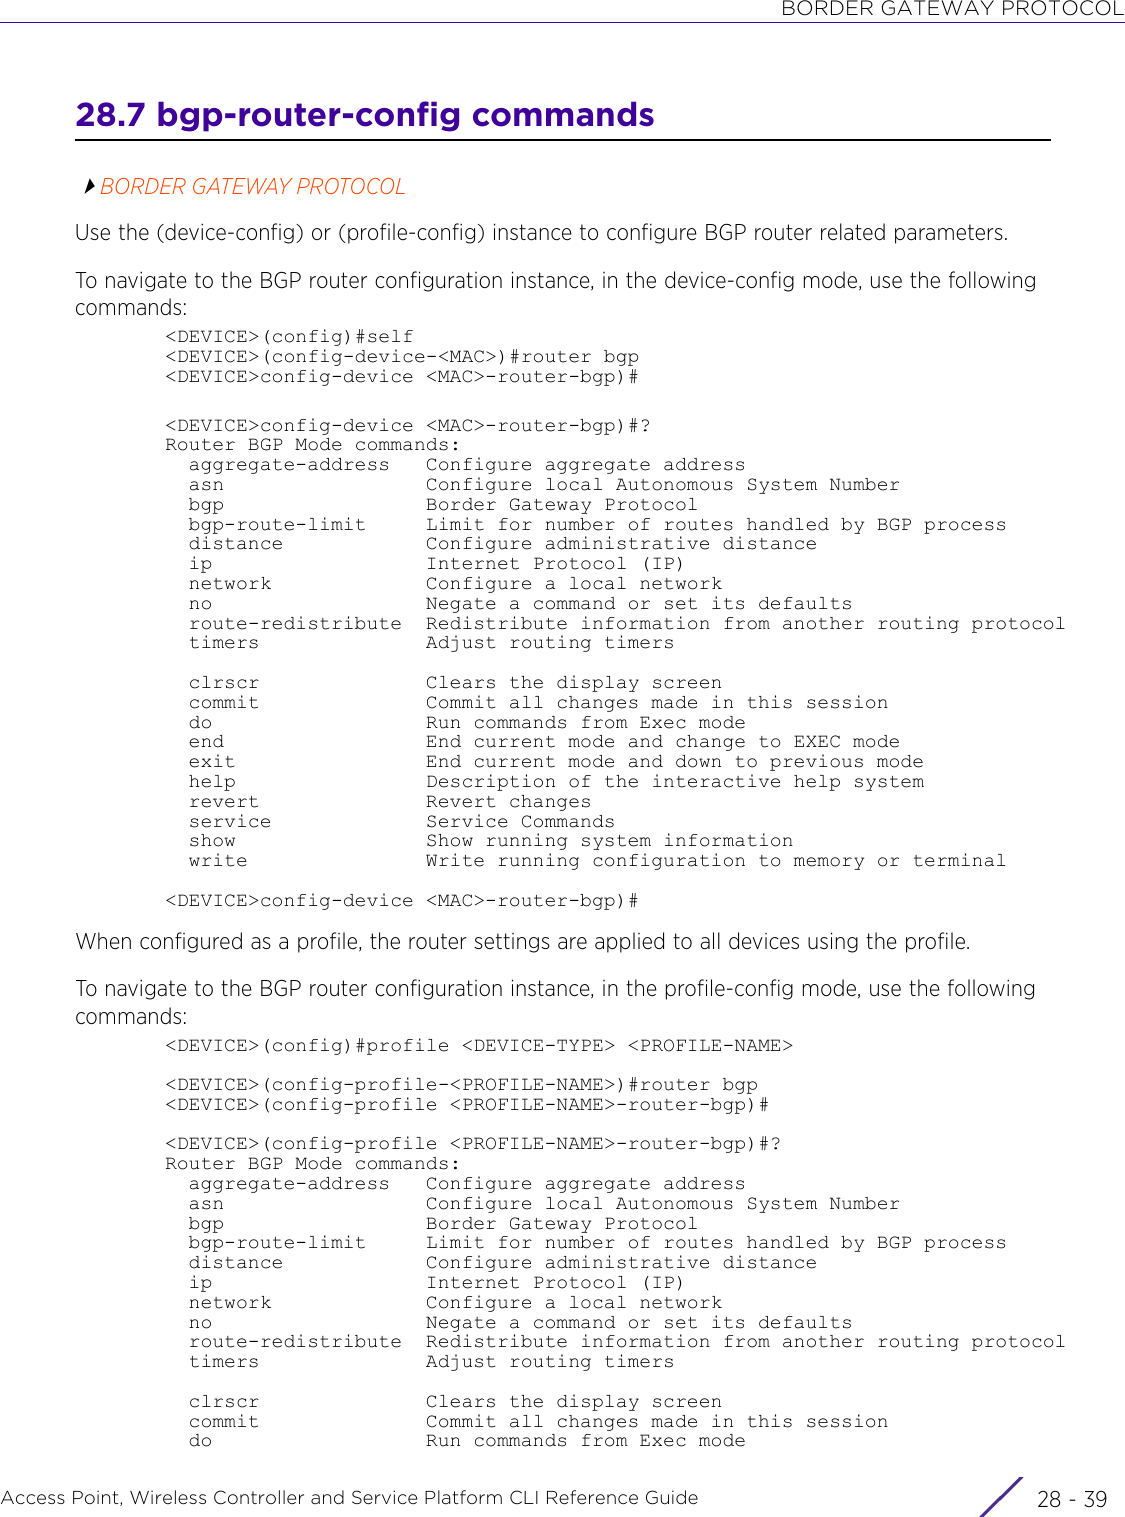 BORDER GATEWAY PROTOCOLAccess Point, Wireless Controller and Service Platform CLI Reference Guide 28 - 3928.7 bgp-router-config commandsBORDER GATEWAY PROTOCOLUse the (device-config) or (profile-config) instance to configure BGP router related parameters.To navigate to the BGP router configuration instance, in the device-config mode, use the following commands:&lt;DEVICE&gt;(config)#self&lt;DEVICE&gt;(config-device-&lt;MAC&gt;)#router bgp&lt;DEVICE&gt;config-device &lt;MAC&gt;-router-bgp)#&lt;DEVICE&gt;config-device &lt;MAC&gt;-router-bgp)#?Router BGP Mode commands:  aggregate-address   Configure aggregate address  asn                 Configure local Autonomous System Number  bgp                 Border Gateway Protocol  bgp-route-limit     Limit for number of routes handled by BGP process  distance            Configure administrative distance  ip                  Internet Protocol (IP)  network             Configure a local network  no                  Negate a command or set its defaults  route-redistribute  Redistribute information from another routing protocol  timers              Adjust routing timers  clrscr              Clears the display screen  commit              Commit all changes made in this session  do                  Run commands from Exec mode  end                 End current mode and change to EXEC mode  exit                End current mode and down to previous mode  help                Description of the interactive help system  revert              Revert changes  service             Service Commands  show                Show running system information  write               Write running configuration to memory or terminal&lt;DEVICE&gt;config-device &lt;MAC&gt;-router-bgp)#When configured as a profile, the router settings are applied to all devices using the profile. To navigate to the BGP router configuration instance, in the profile-config mode, use the following commands:&lt;DEVICE&gt;(config)#profile &lt;DEVICE-TYPE&gt; &lt;PROFILE-NAME&gt;&lt;DEVICE&gt;(config-profile-&lt;PROFILE-NAME&gt;)#router bgp&lt;DEVICE&gt;(config-profile &lt;PROFILE-NAME&gt;-router-bgp)#&lt;DEVICE&gt;(config-profile &lt;PROFILE-NAME&gt;-router-bgp)#?Router BGP Mode commands:  aggregate-address   Configure aggregate address  asn                 Configure local Autonomous System Number  bgp                 Border Gateway Protocol  bgp-route-limit     Limit for number of routes handled by BGP process  distance            Configure administrative distance  ip                  Internet Protocol (IP)  network             Configure a local network  no                  Negate a command or set its defaults  route-redistribute  Redistribute information from another routing protocol  timers              Adjust routing timers  clrscr              Clears the display screen  commit              Commit all changes made in this session  do                  Run commands from Exec mode